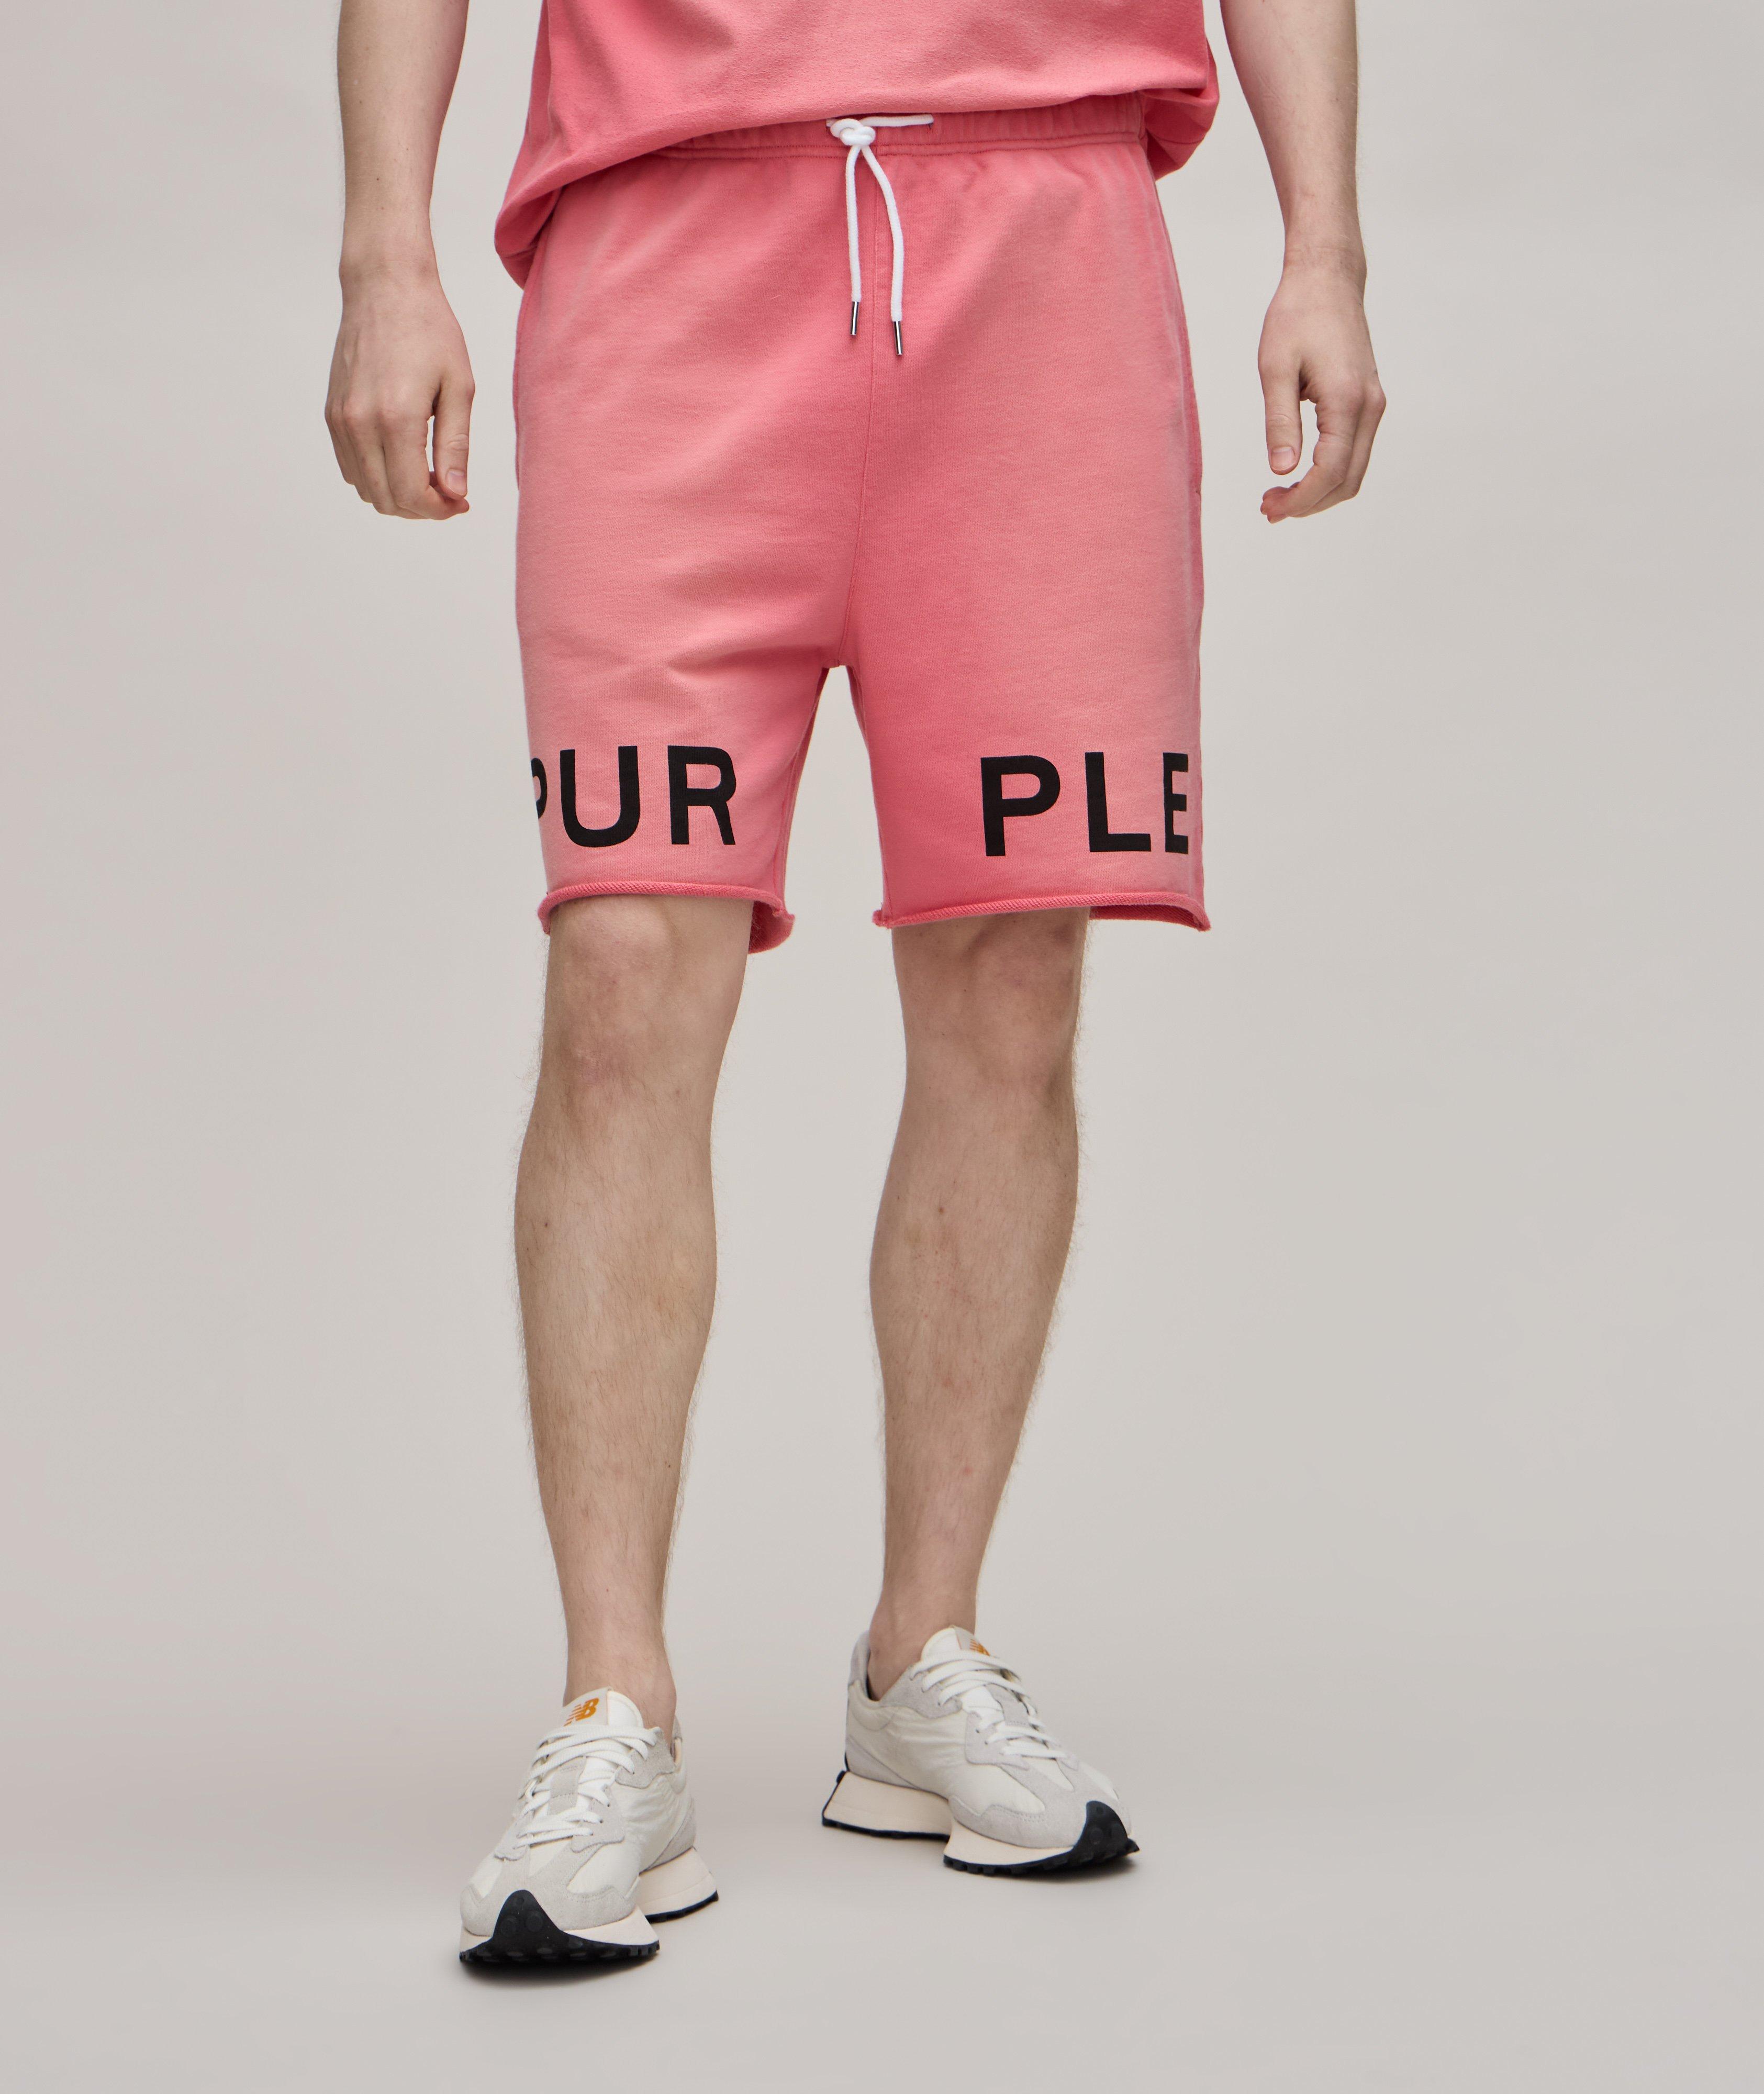 Terry Cotton Sweat Shorts  image 1